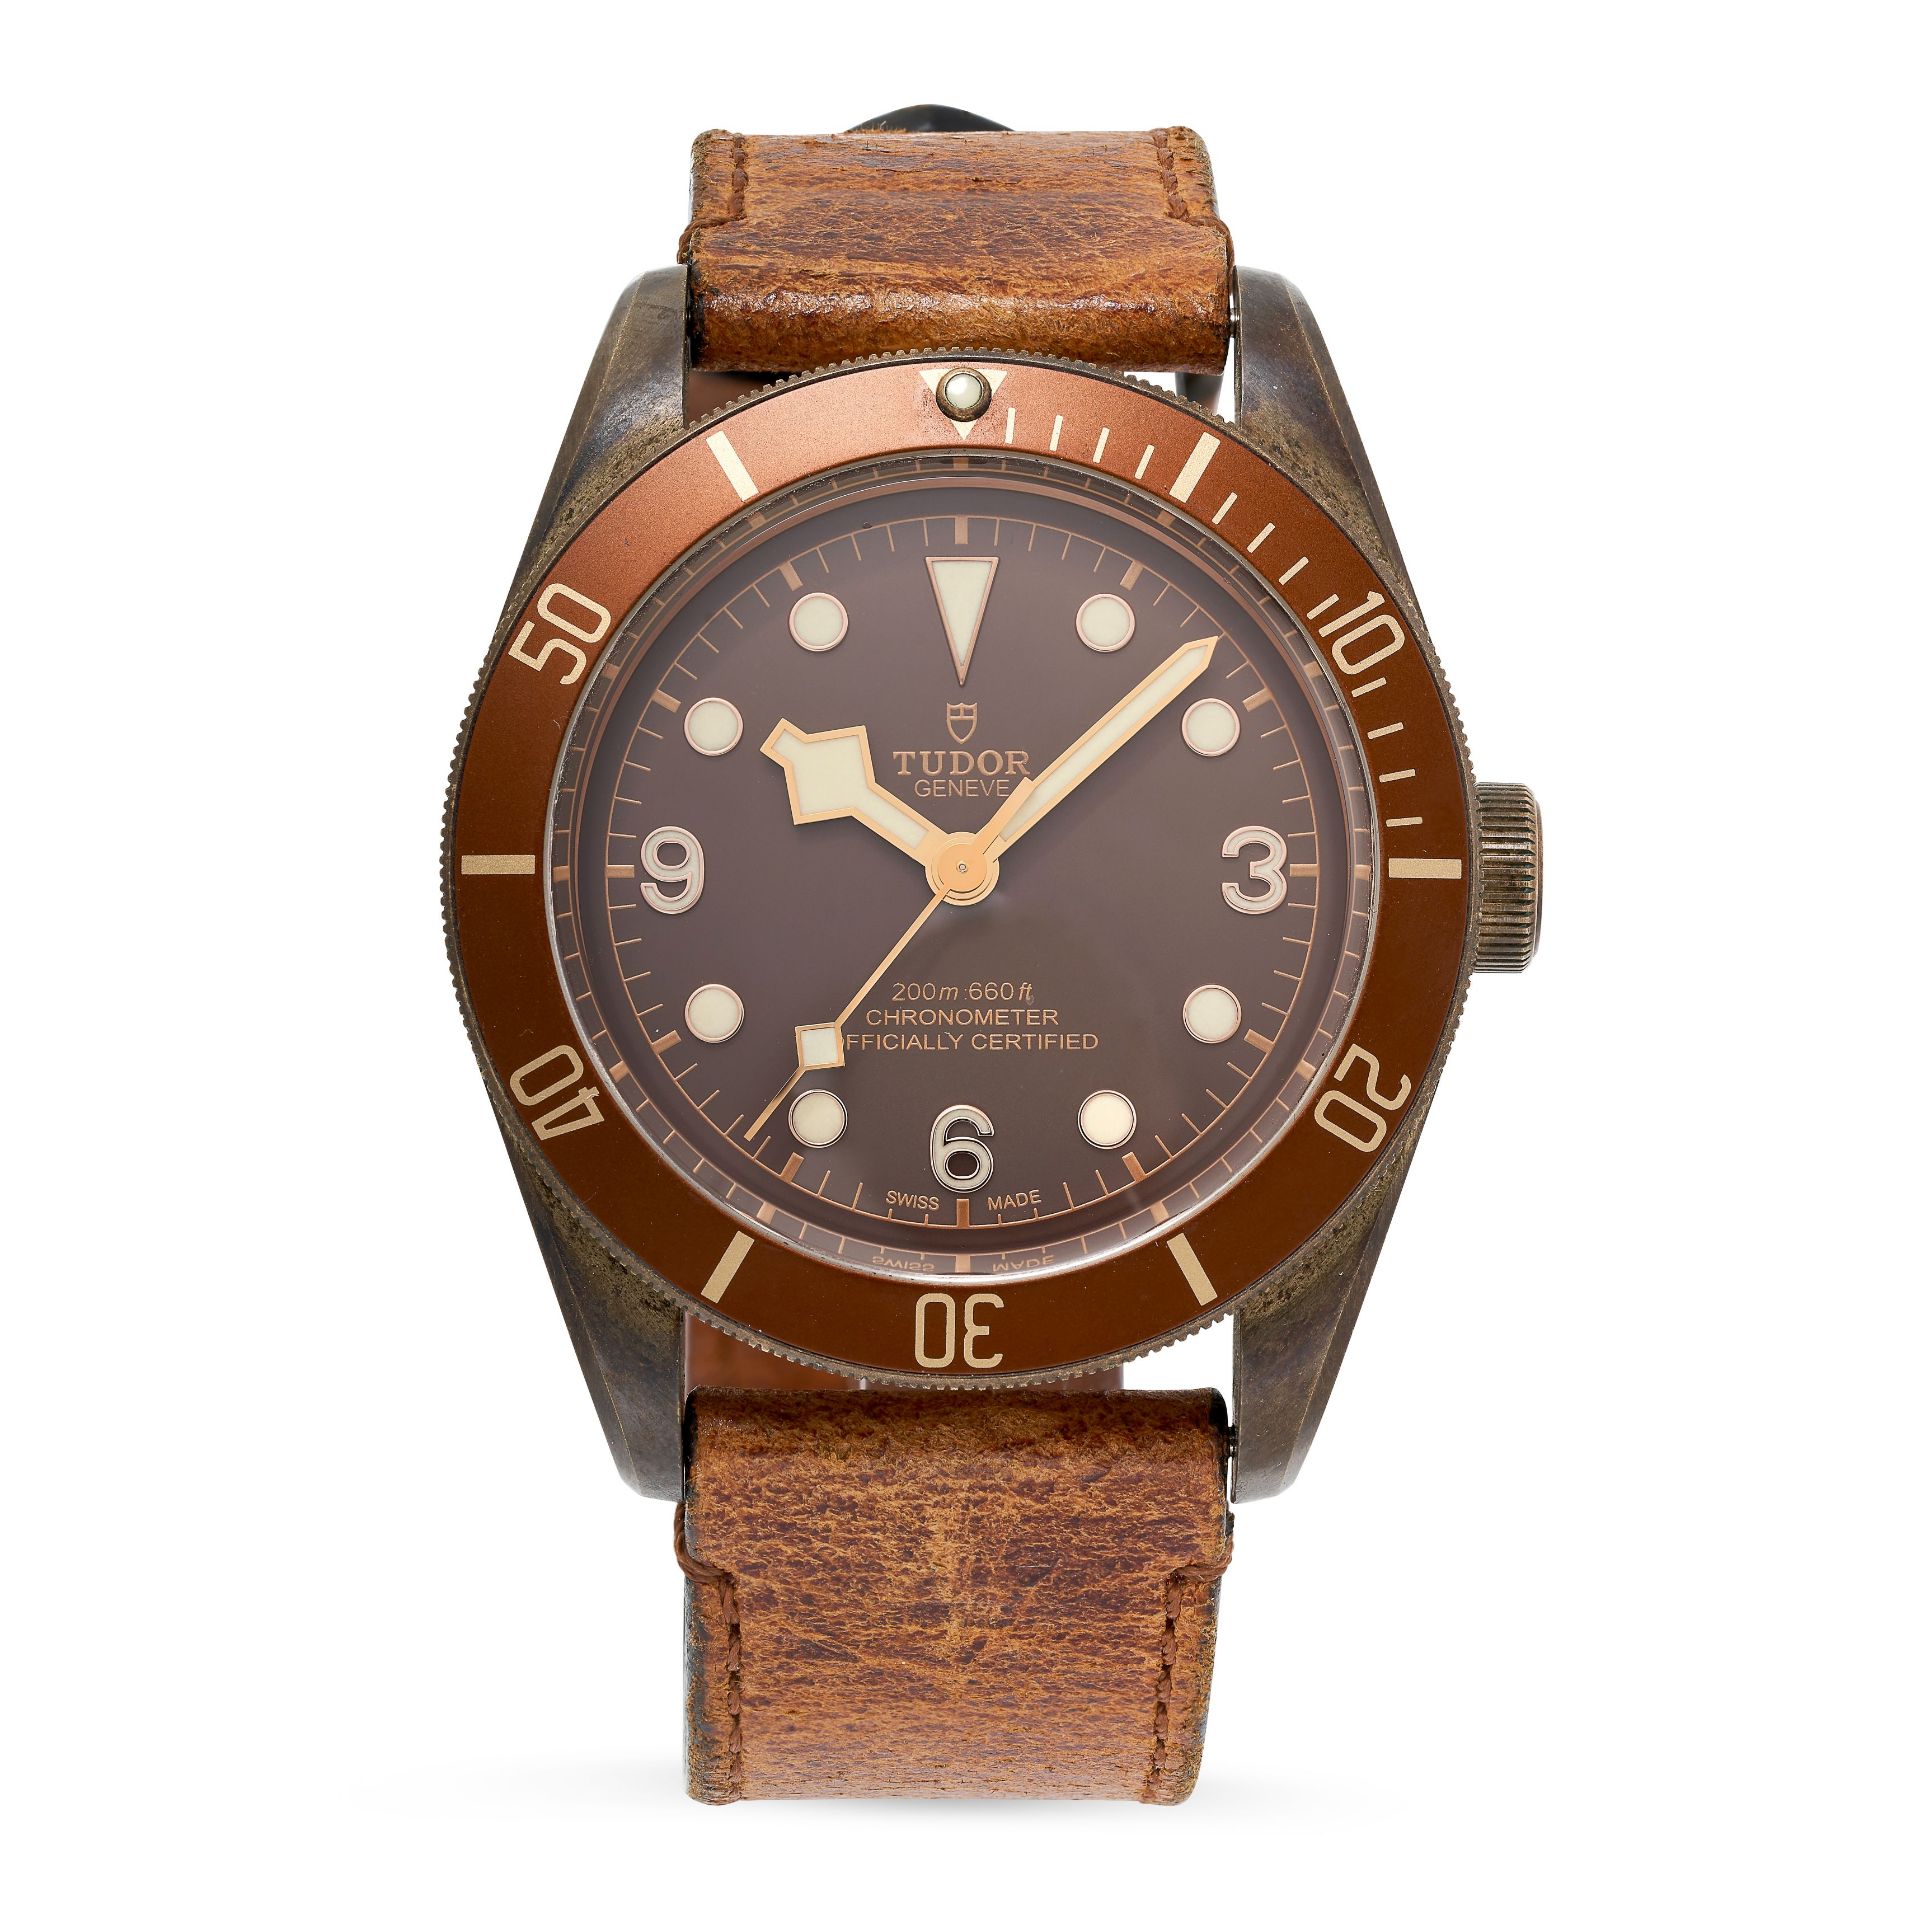 TUDOR, BRONZE BLACK BAY WATCH, REF. 75290BM a bronze case with a brown dial, to a brown leather